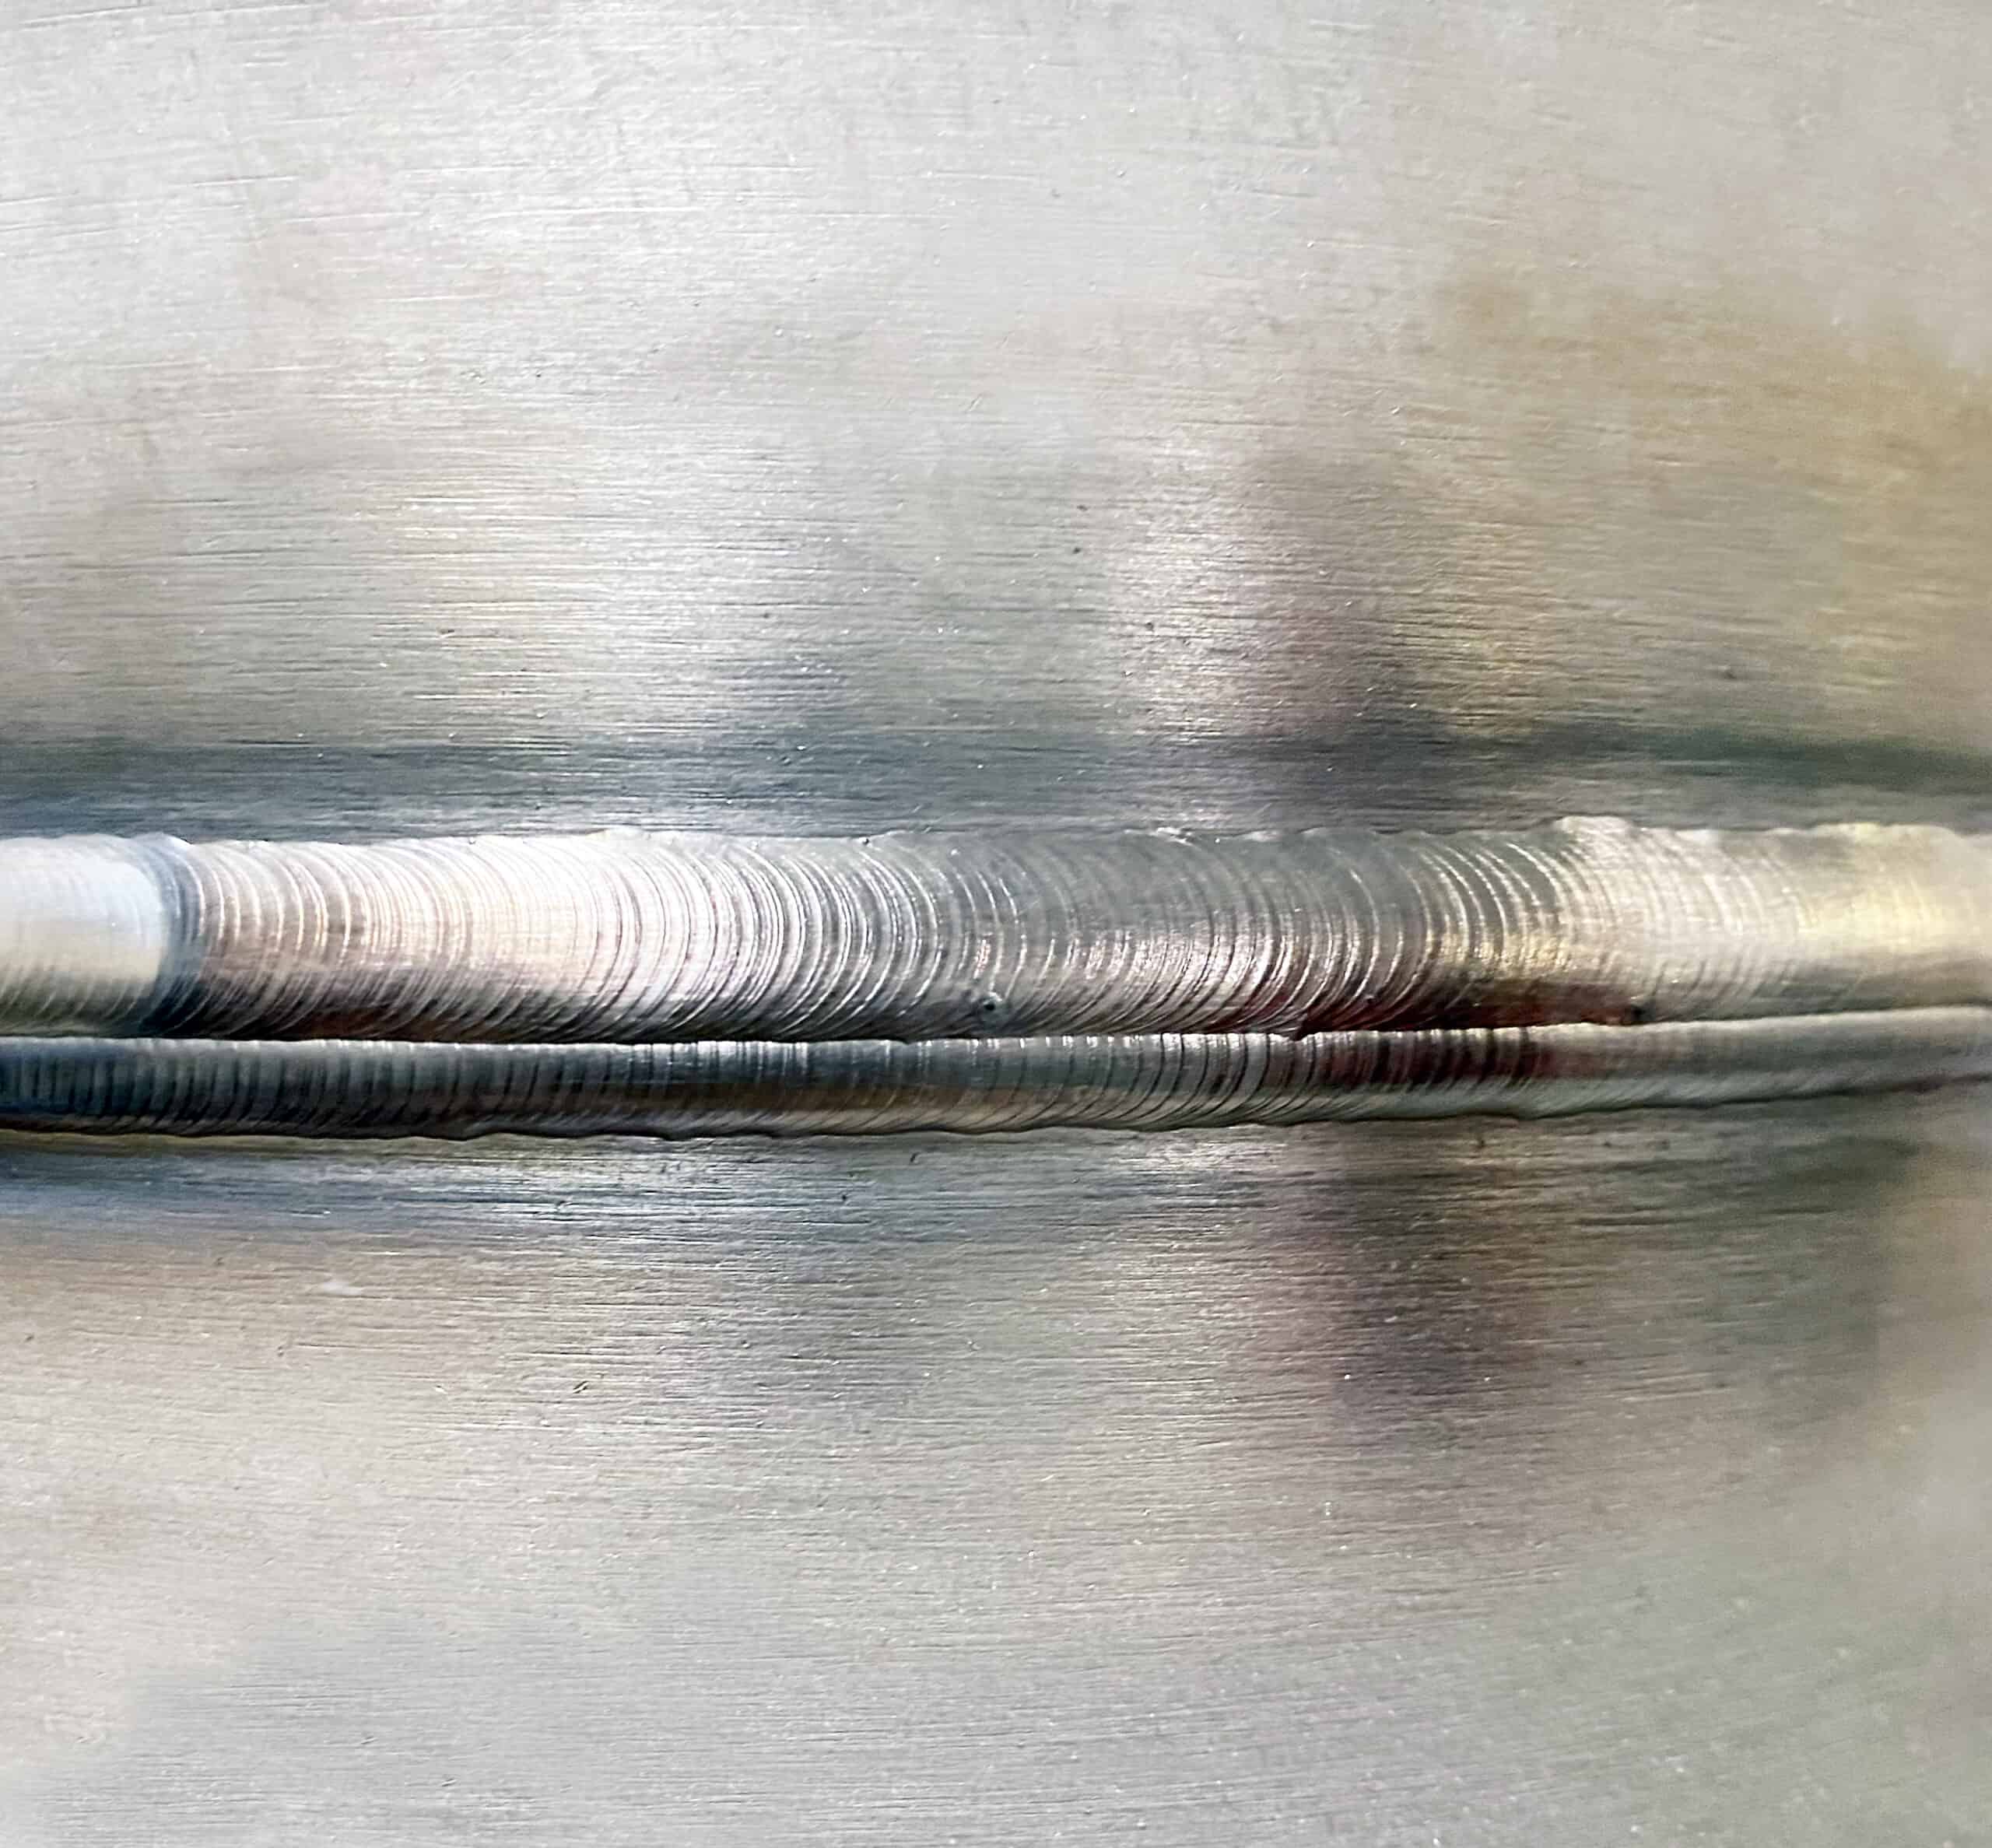 High-Purity Pipe Welding: How to Weld High- and Ultra-Purity Piping